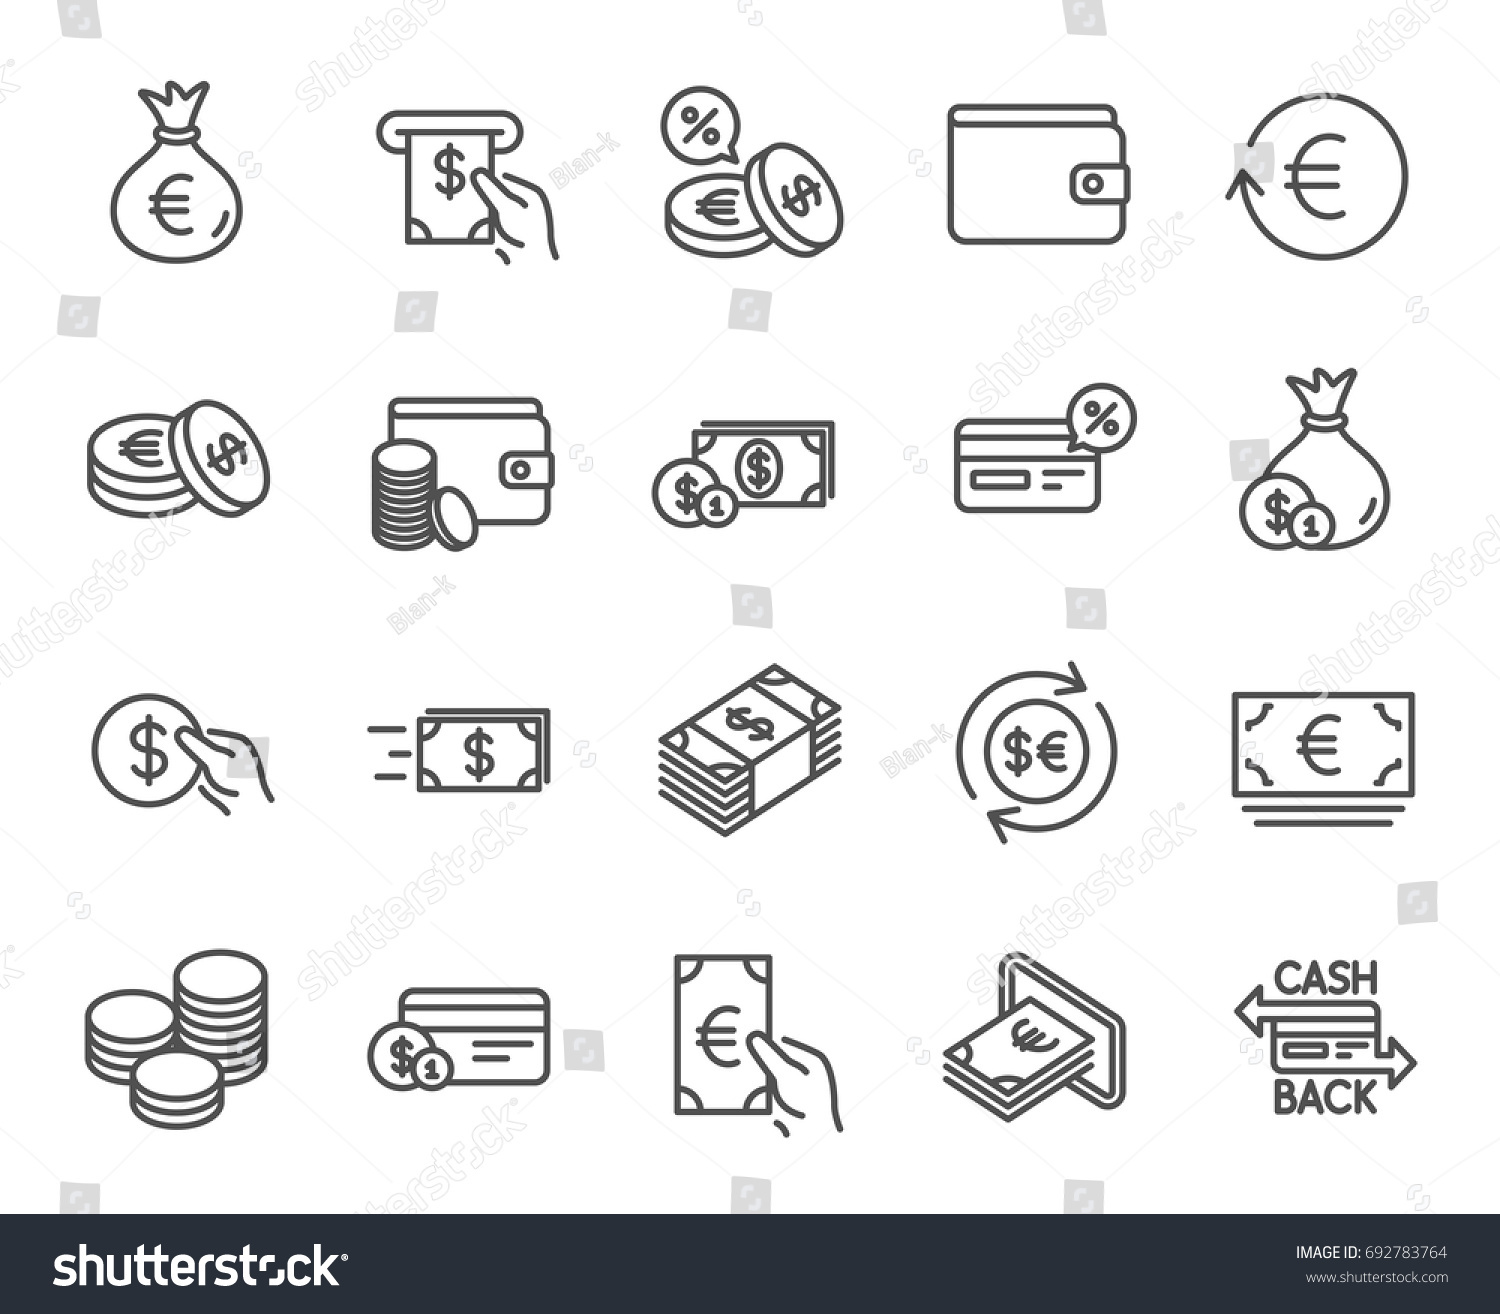 Money Line Icons Set Credit Card Stock Vector Royalty Free 692783764